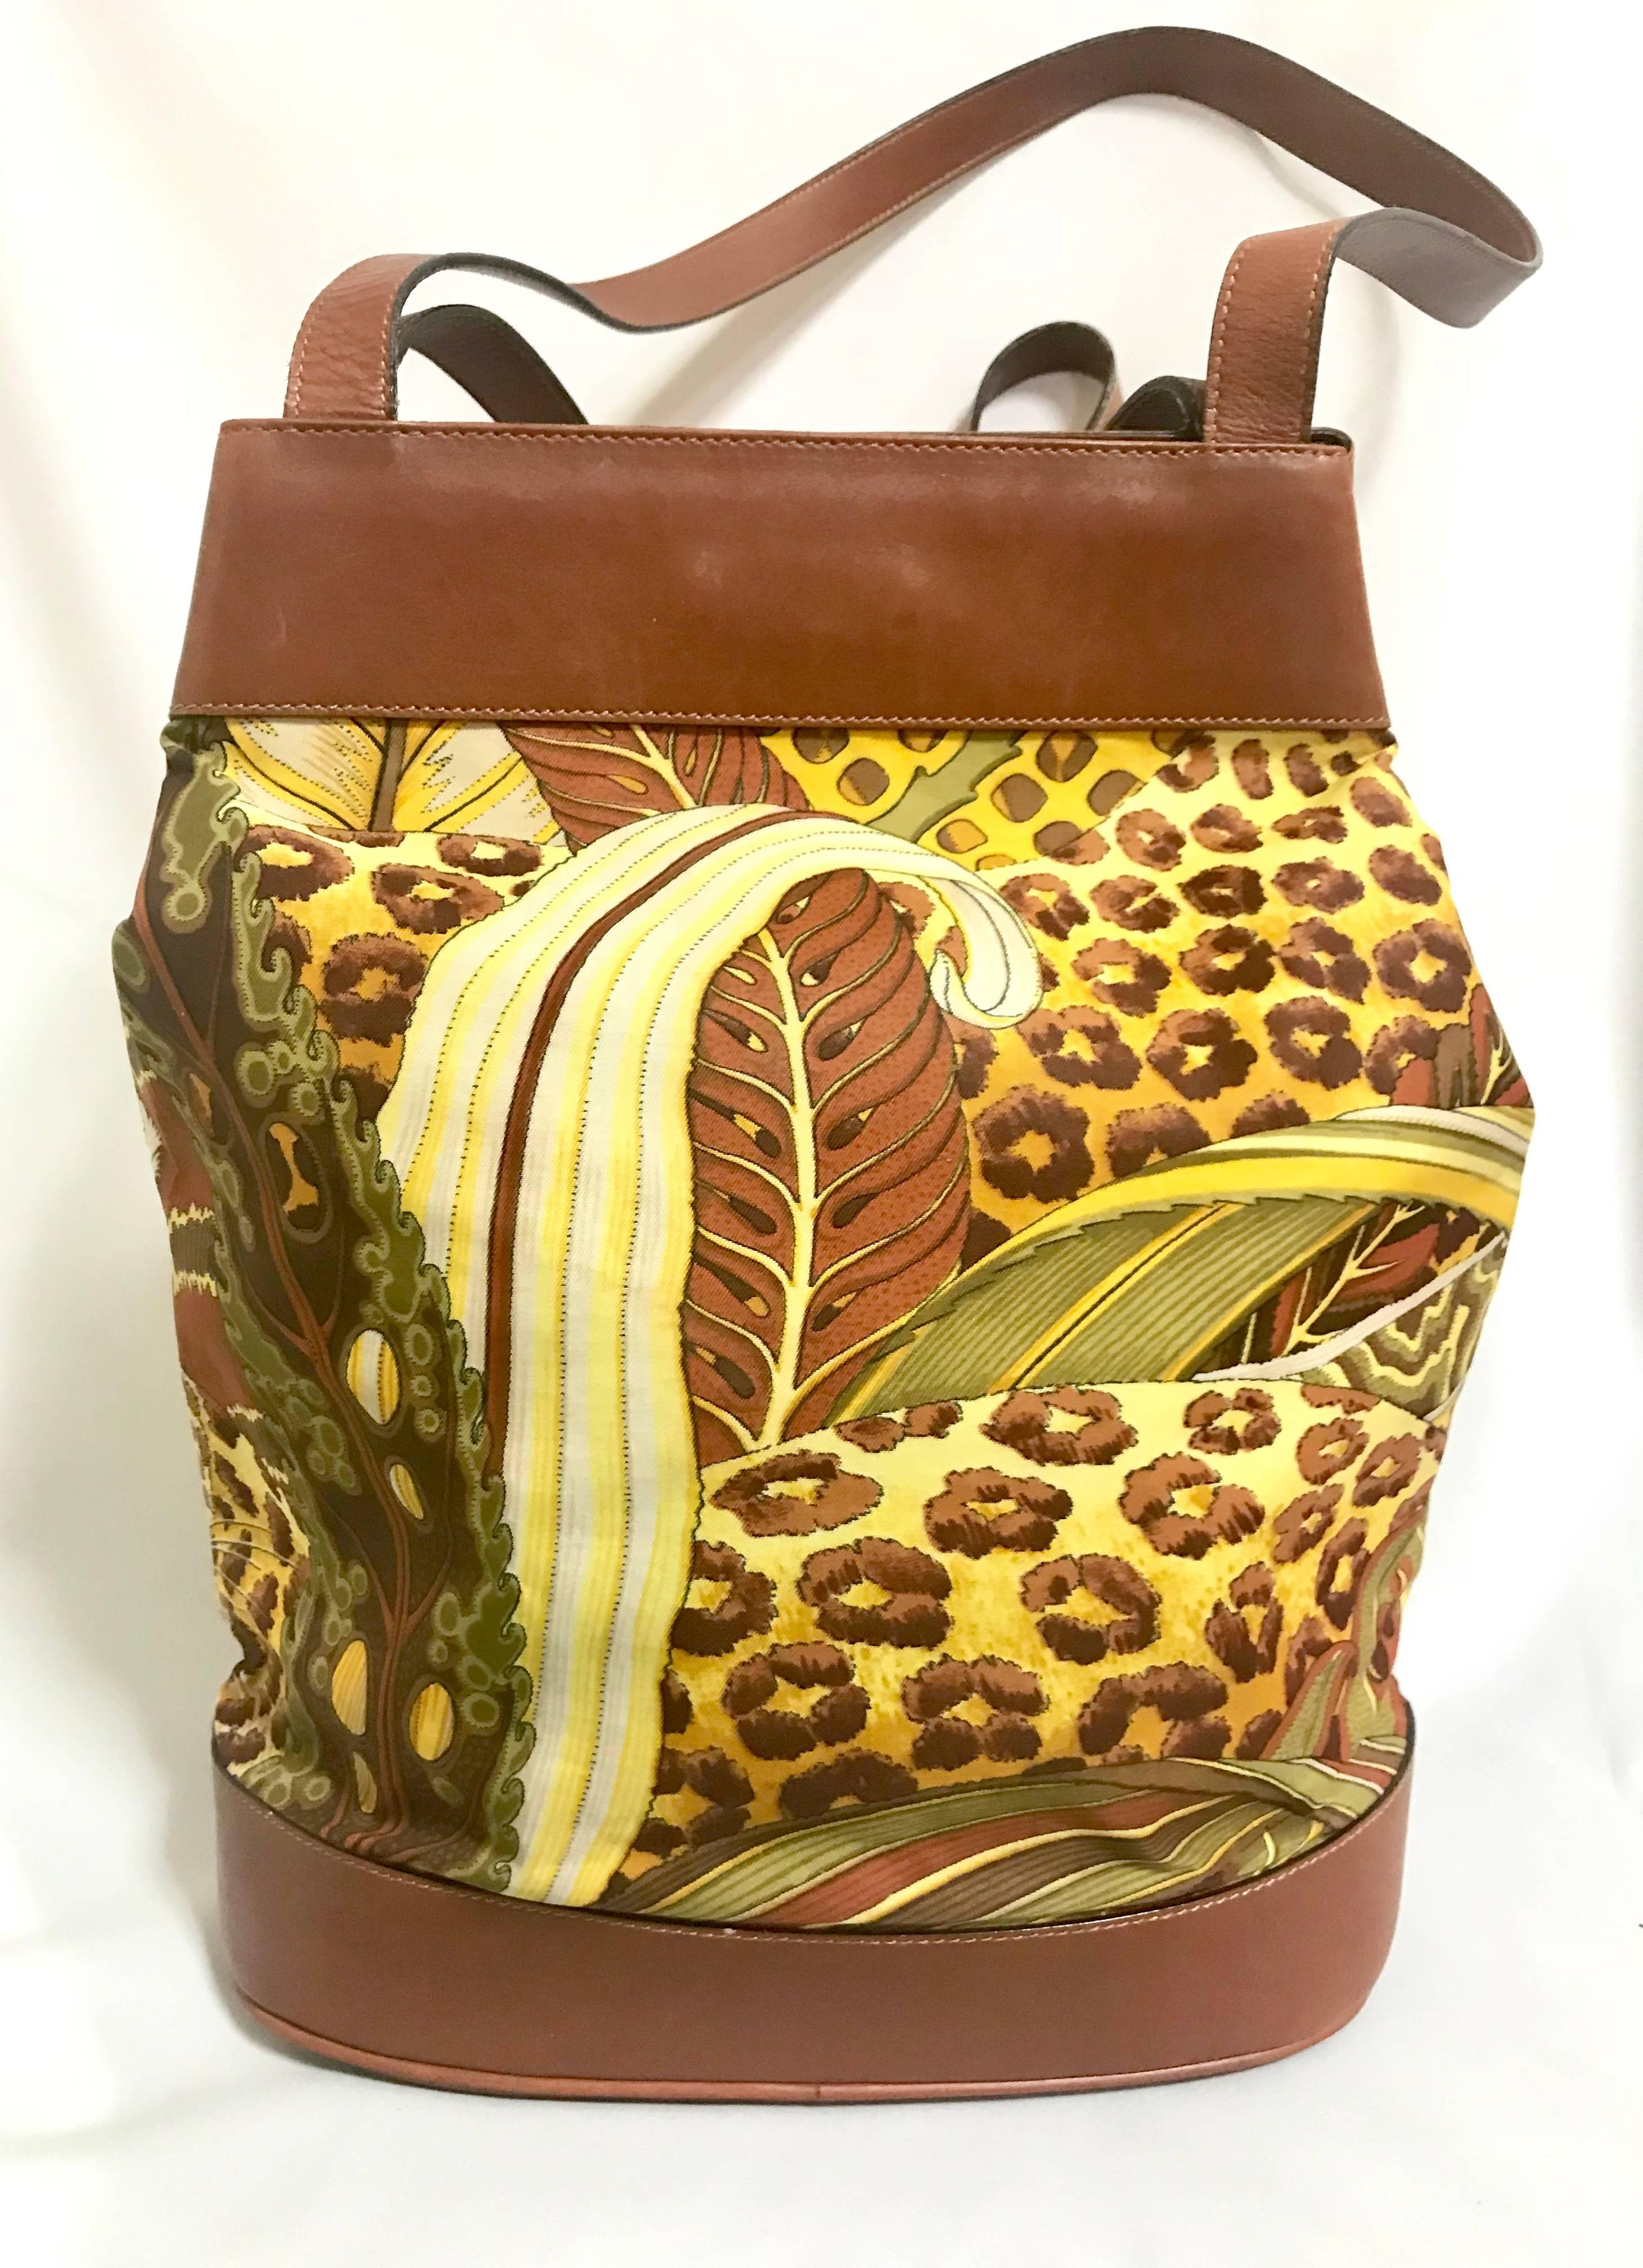 1990s. Vintage Salvatore Ferragamo leopard in safari jungle and brown leather hobo shoulder bag with golden gancini motif. Must have.

Introducing another unique and beautiful vintage bag from Salvatore Ferragamo back in the 90's.
Featuring 2